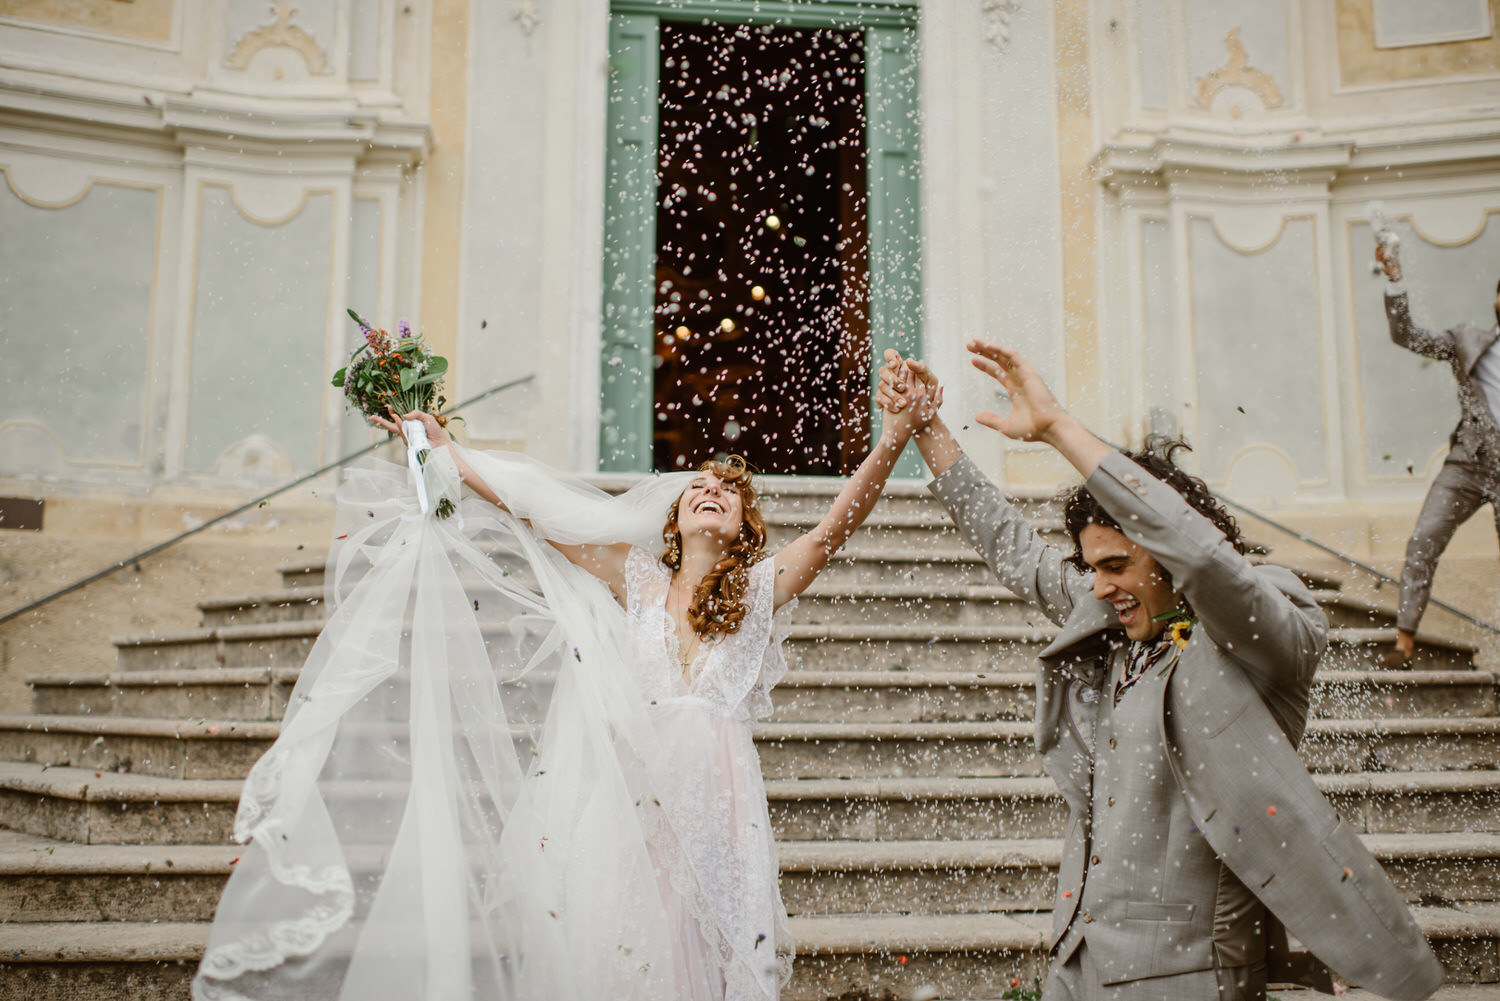 A bride and groom celebrate with their arms raised as a cloud of white confetti falls around them. She's in a white dress with a green bouquet and he's in a pale grey suit. They're on the steps on the ceremony venue. With Ellie Gillard Photography